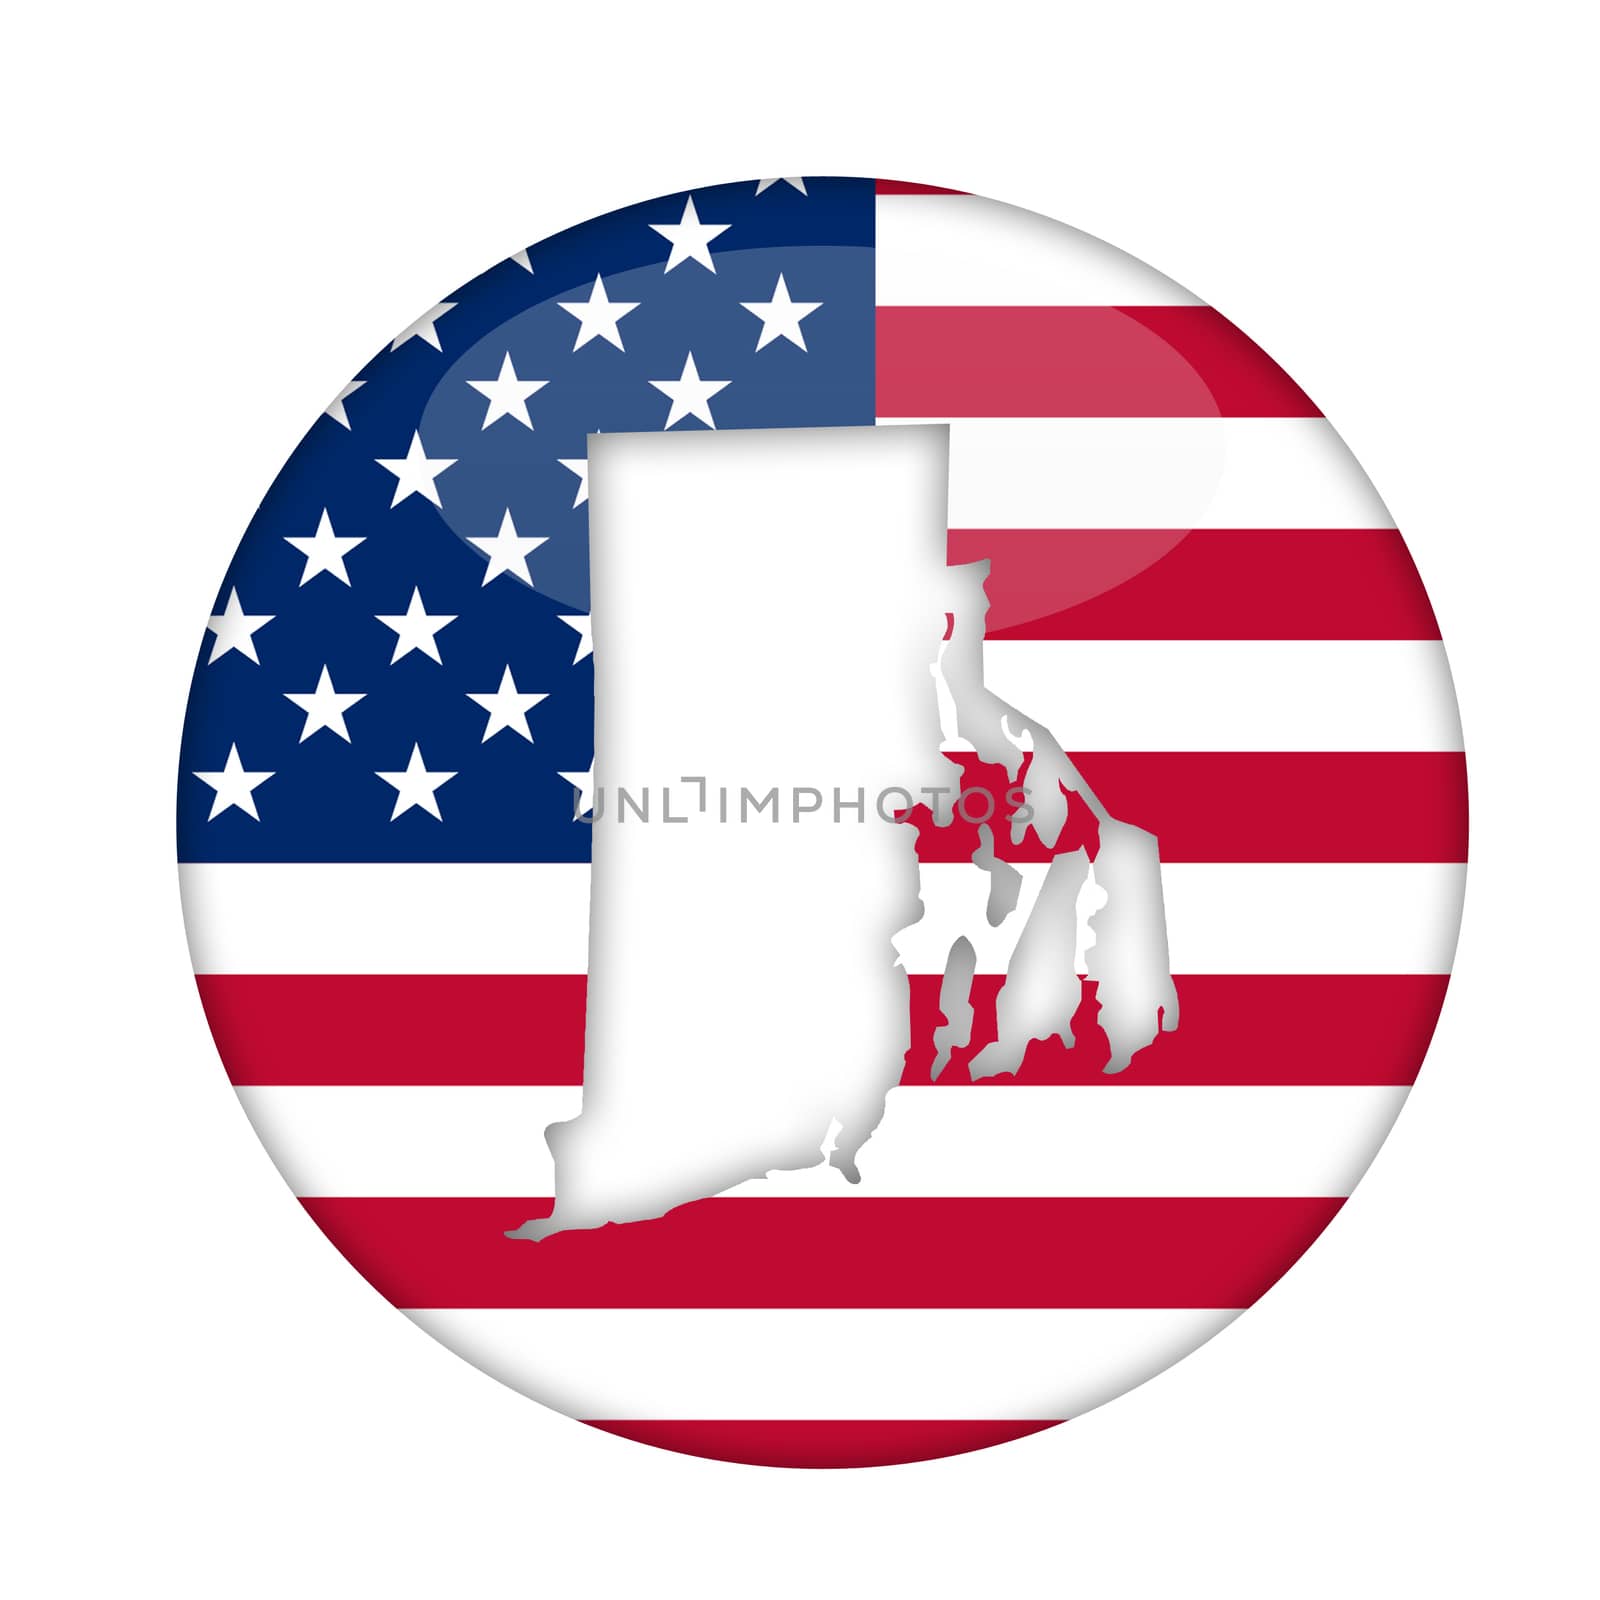 Rhode Island state of America badge by speedfighter